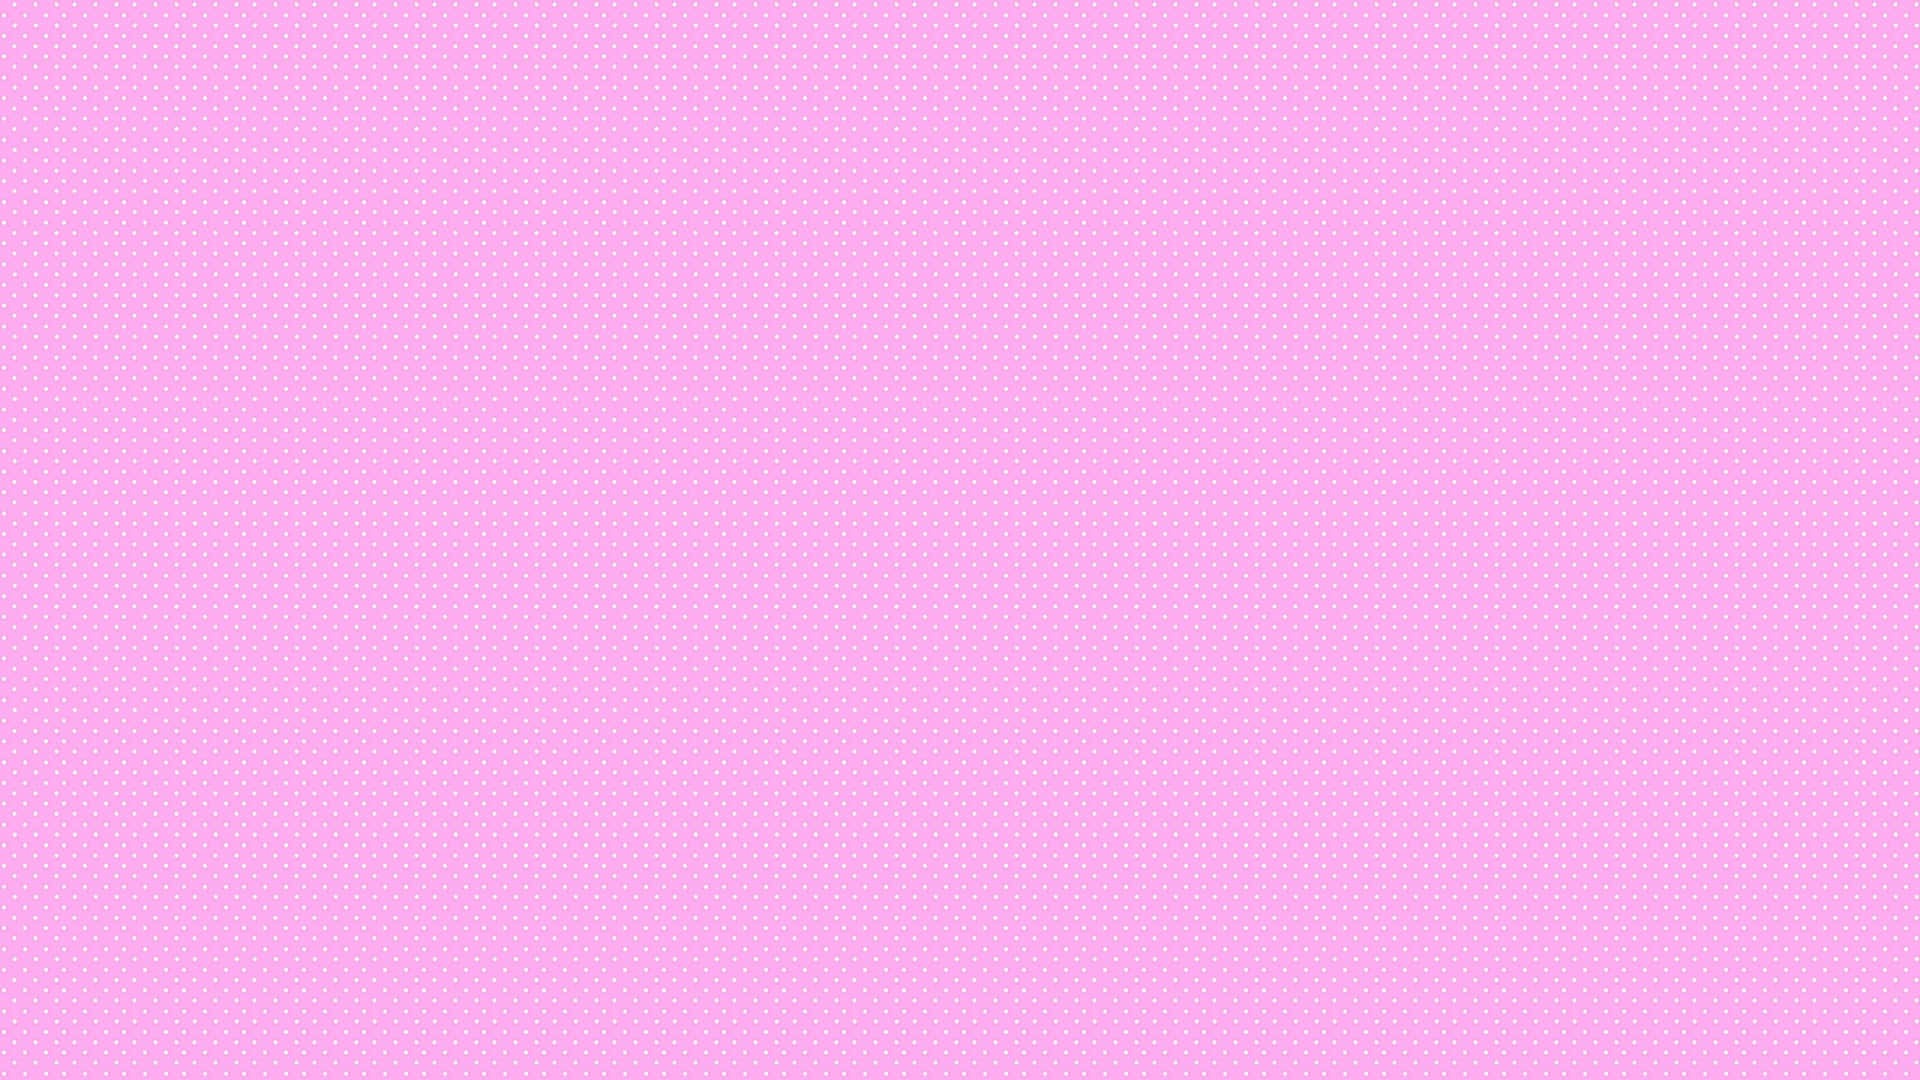 Working In Style With A Pastel Pink Aesthetic Computer Wallpaper